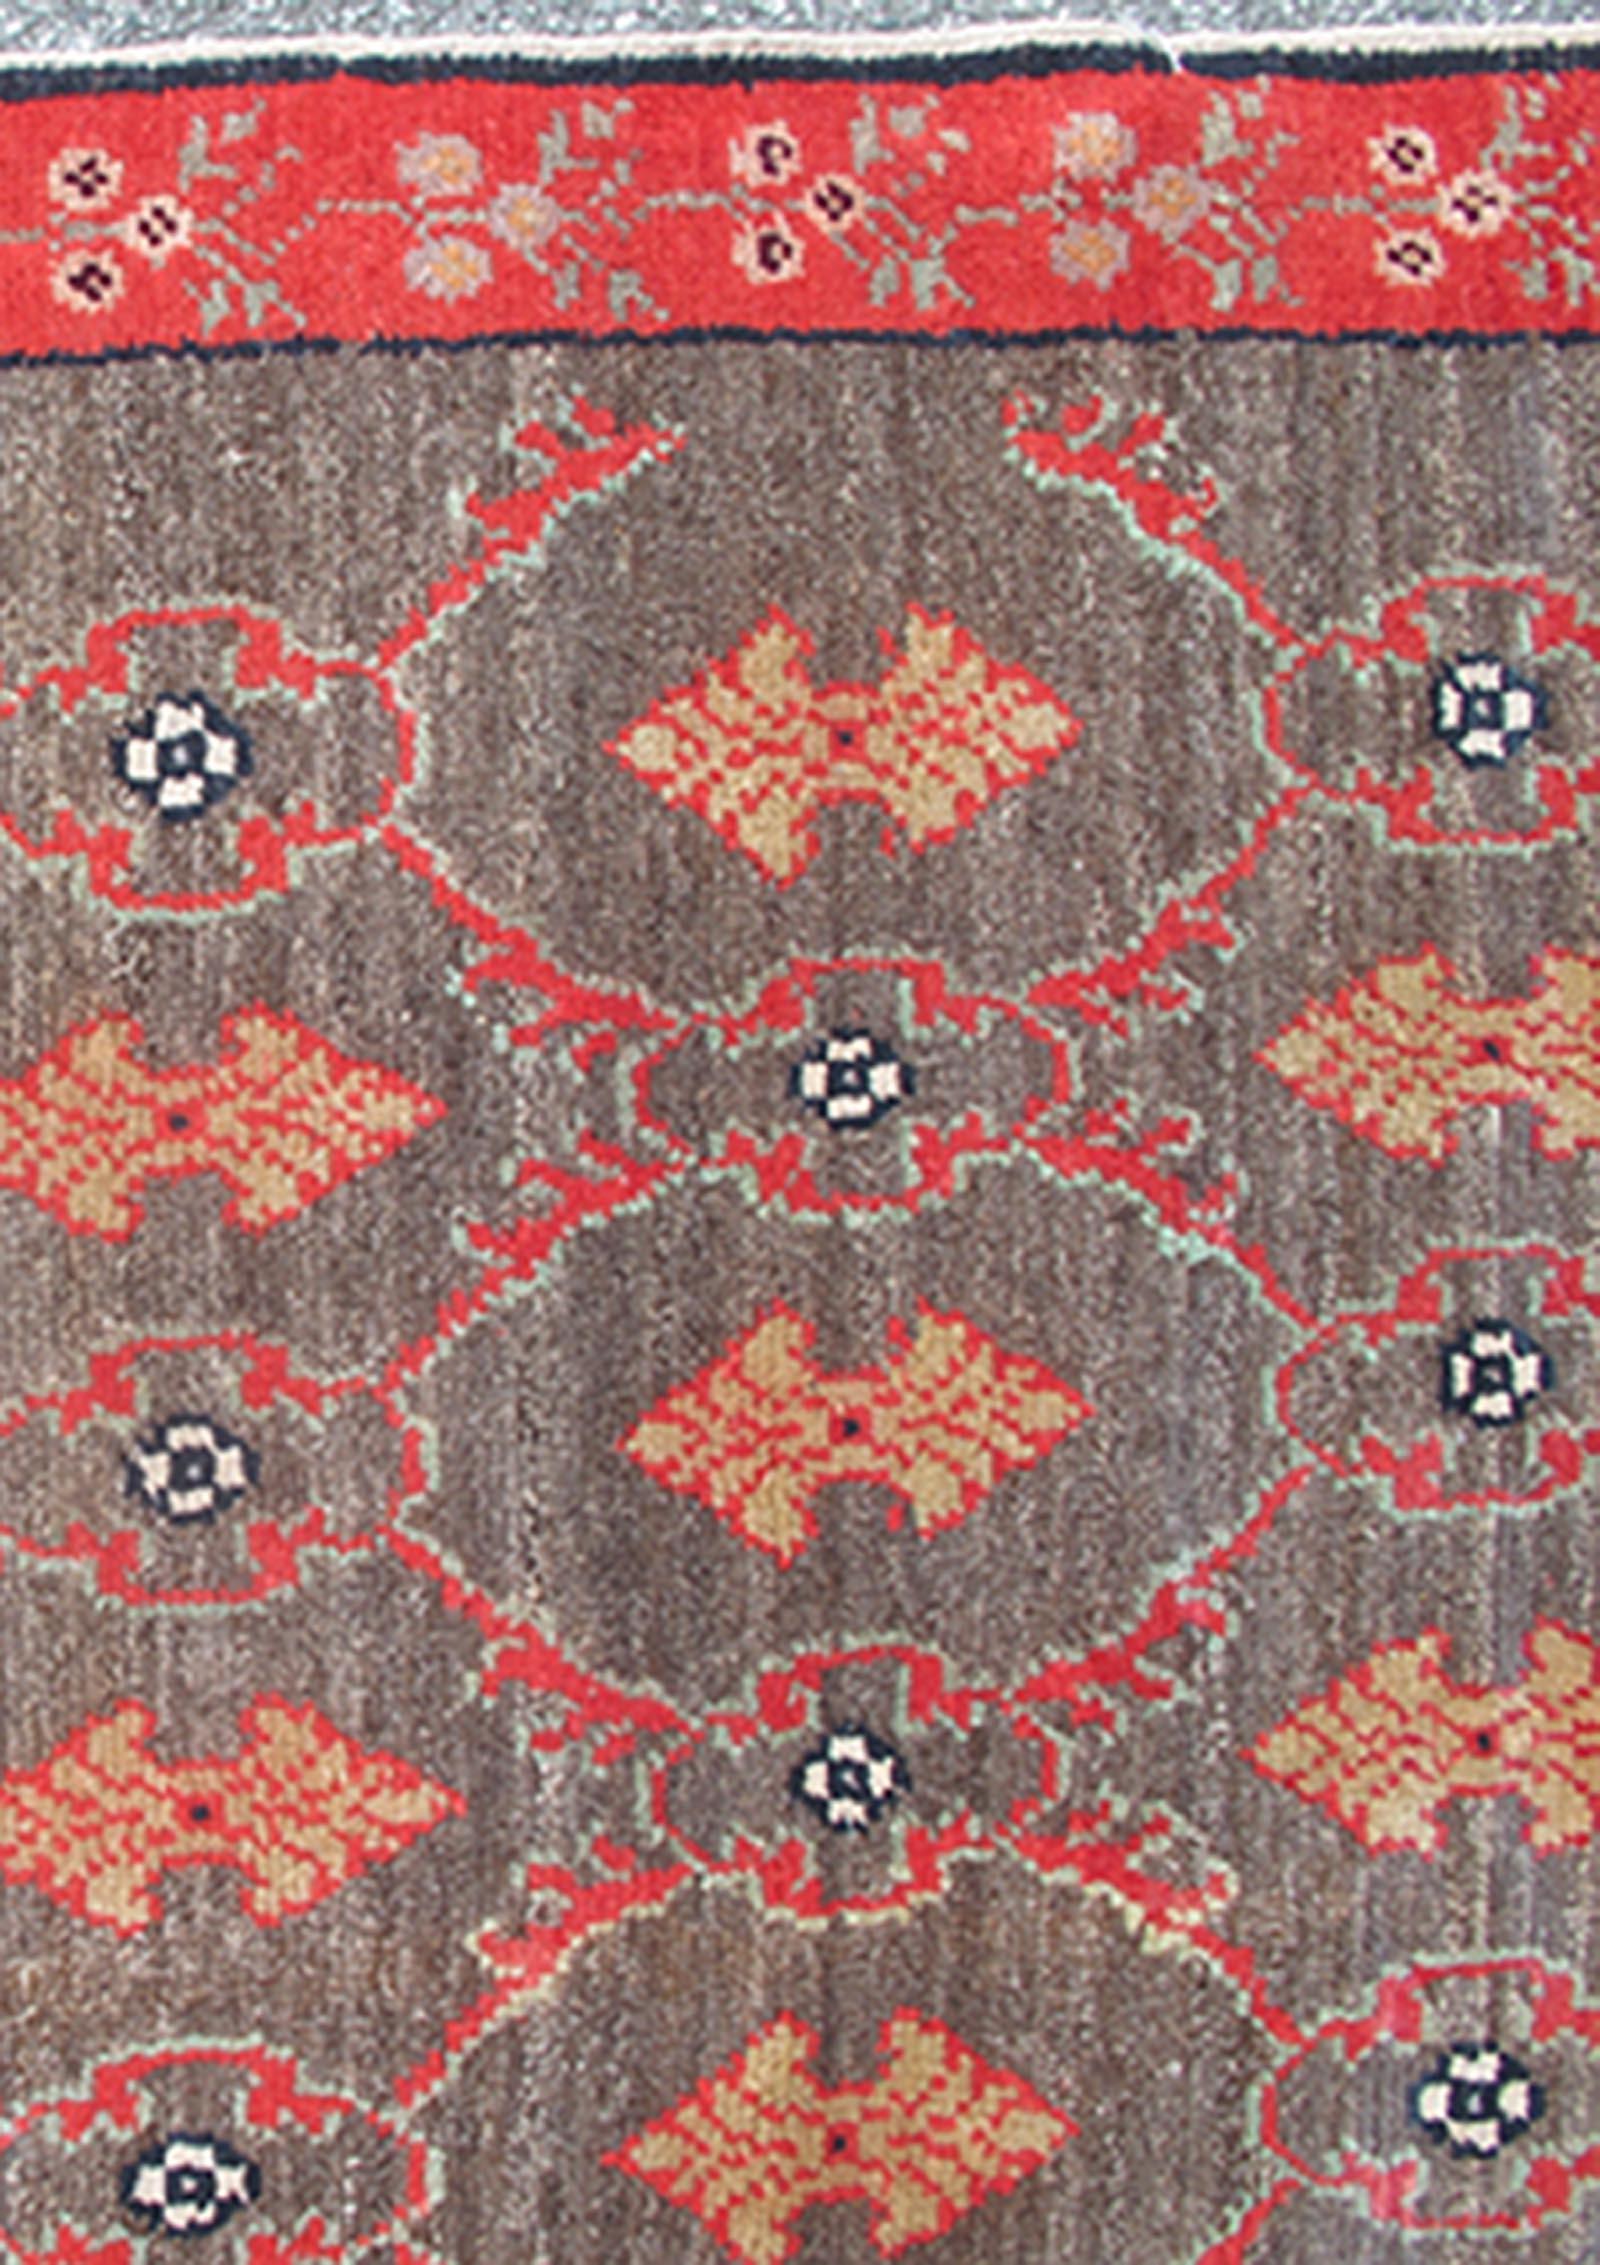 Vintage Turkish Tulu rug with a modern design in charcoal background
All-over design vintage Turkish modern rug EN-306, country of origin / type: Turkey / Oushak, circa 1940.

This modern-design vintage Turkish Tulu rug features an all-over,